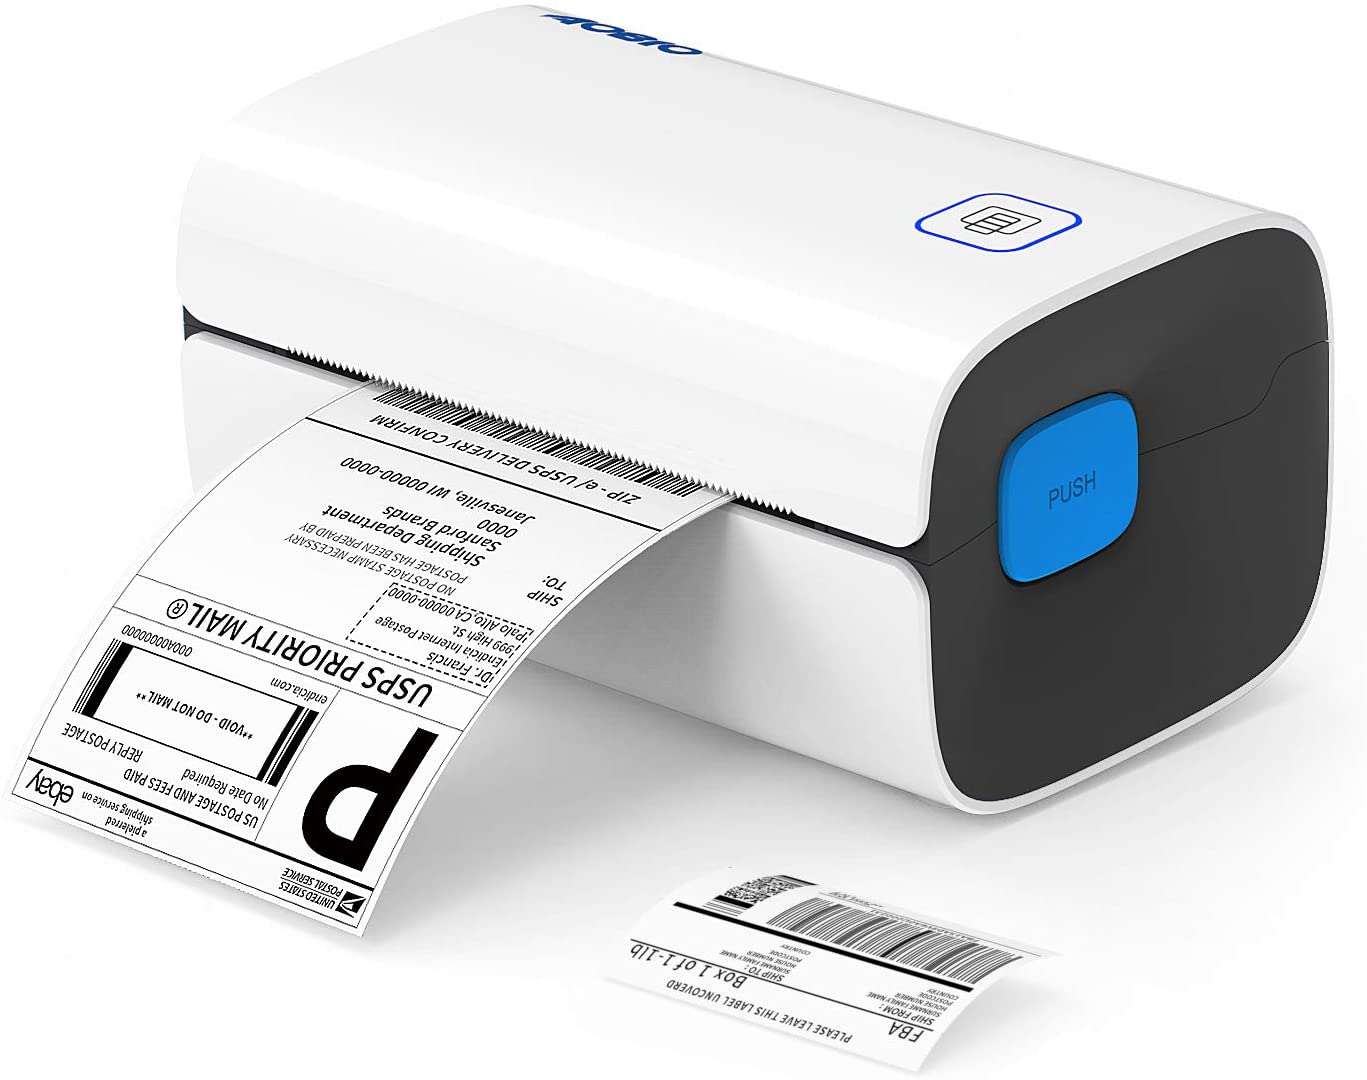 AOBIO Shipping Label Printer 4x6 Thermal Desktop Printer High Speed Printer for Shipping, Barcodes, Mailing, Labels and Compatible with Amazon, Ebay, Shopify, FedEx, Ups, DHL, USPS and More